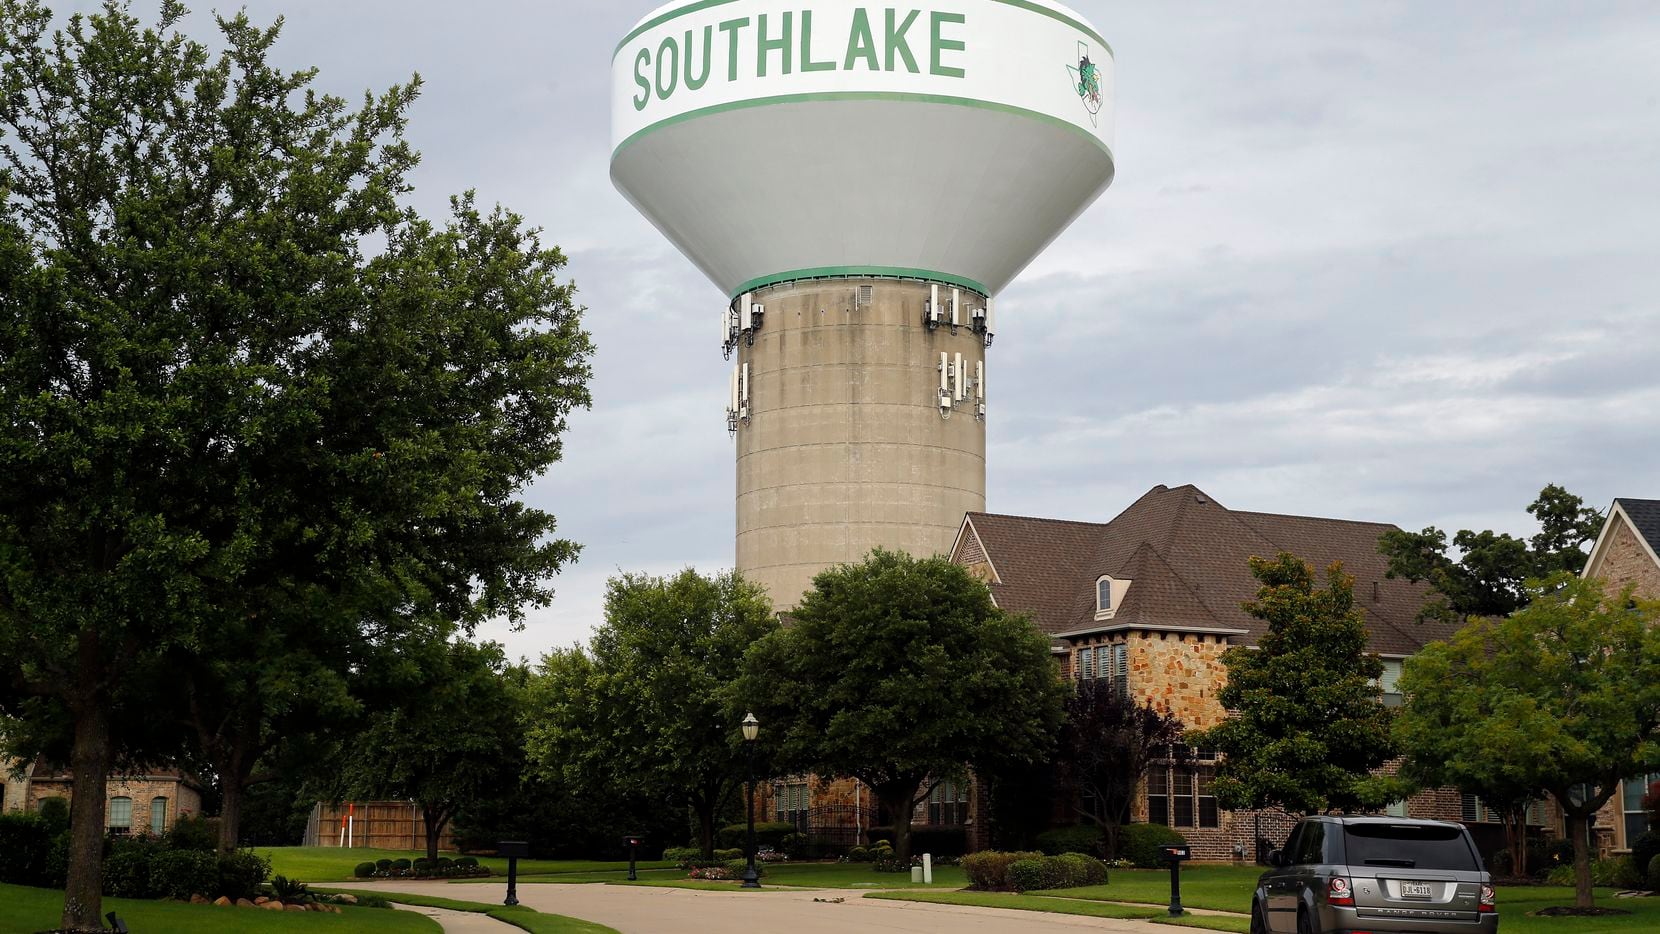 Spraying began Wednesday in the 3000 block of Woodland Drive in north Southlake. The treatment of the area Friday will occur between 9 p.m. and 5 a.m., weather permitting.